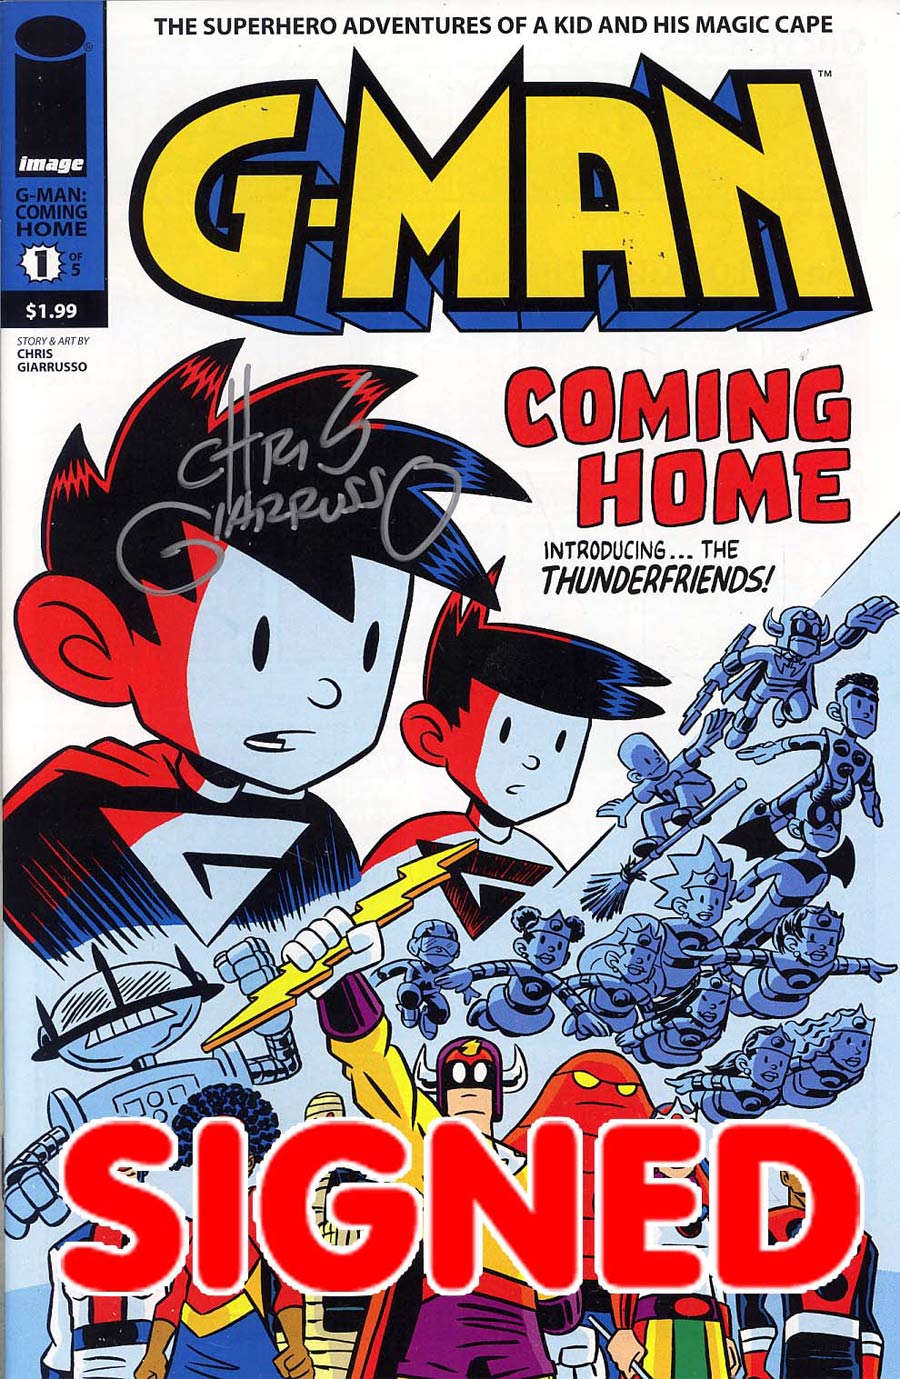 G-Man Coming Home #1 Cover B Signed by Chris Giarrusso